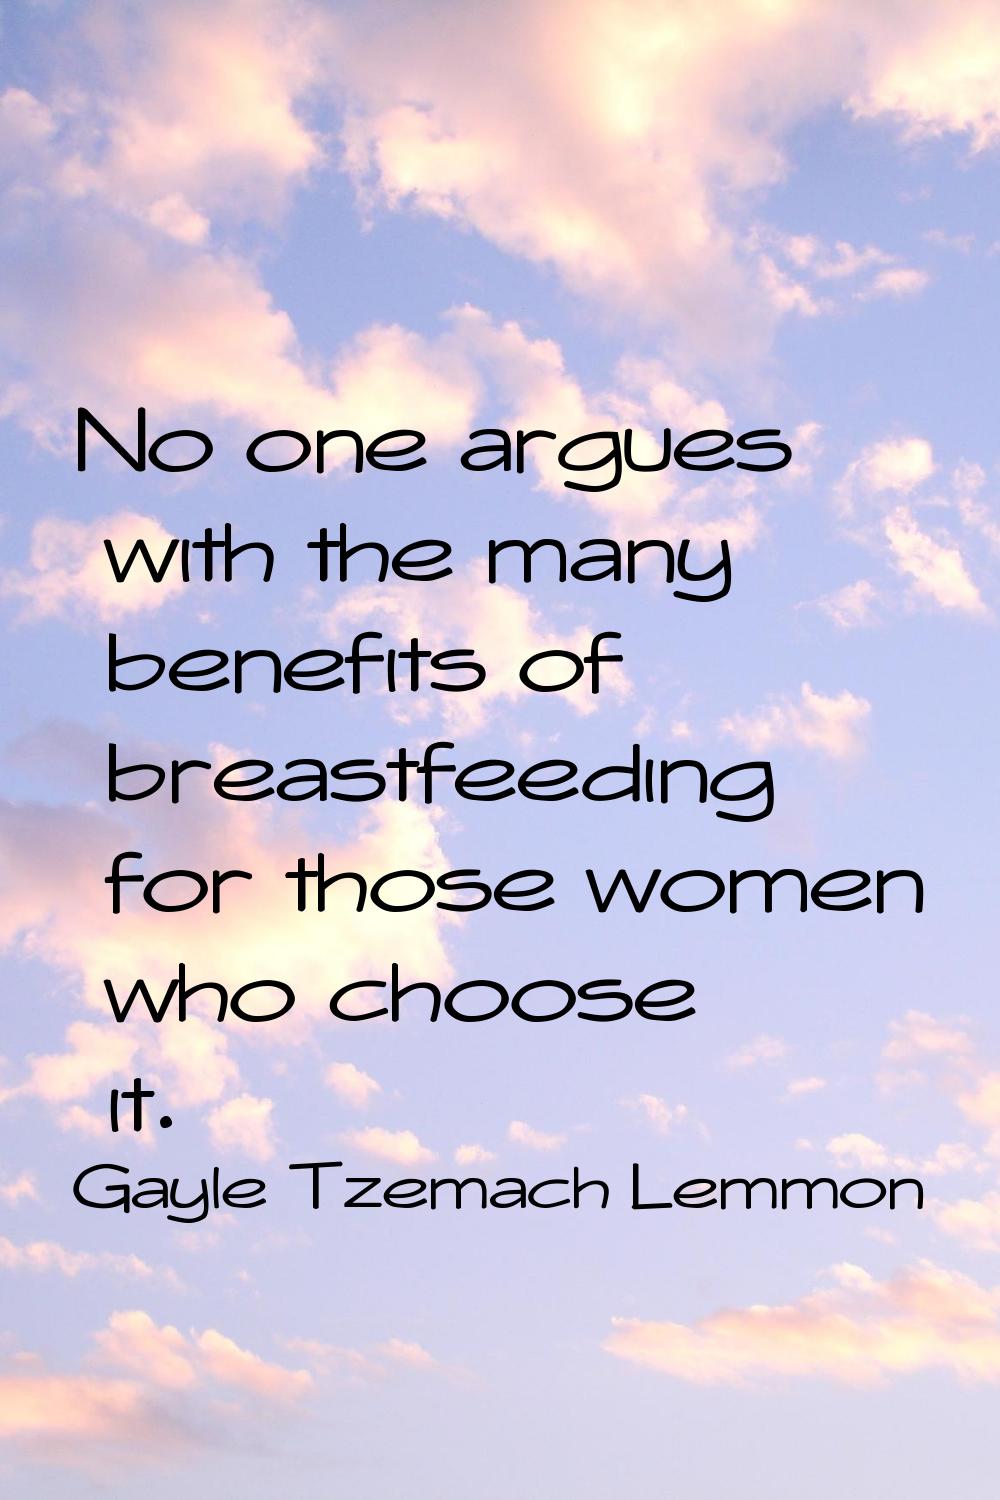 No one argues with the many benefits of breastfeeding for those women who choose it.